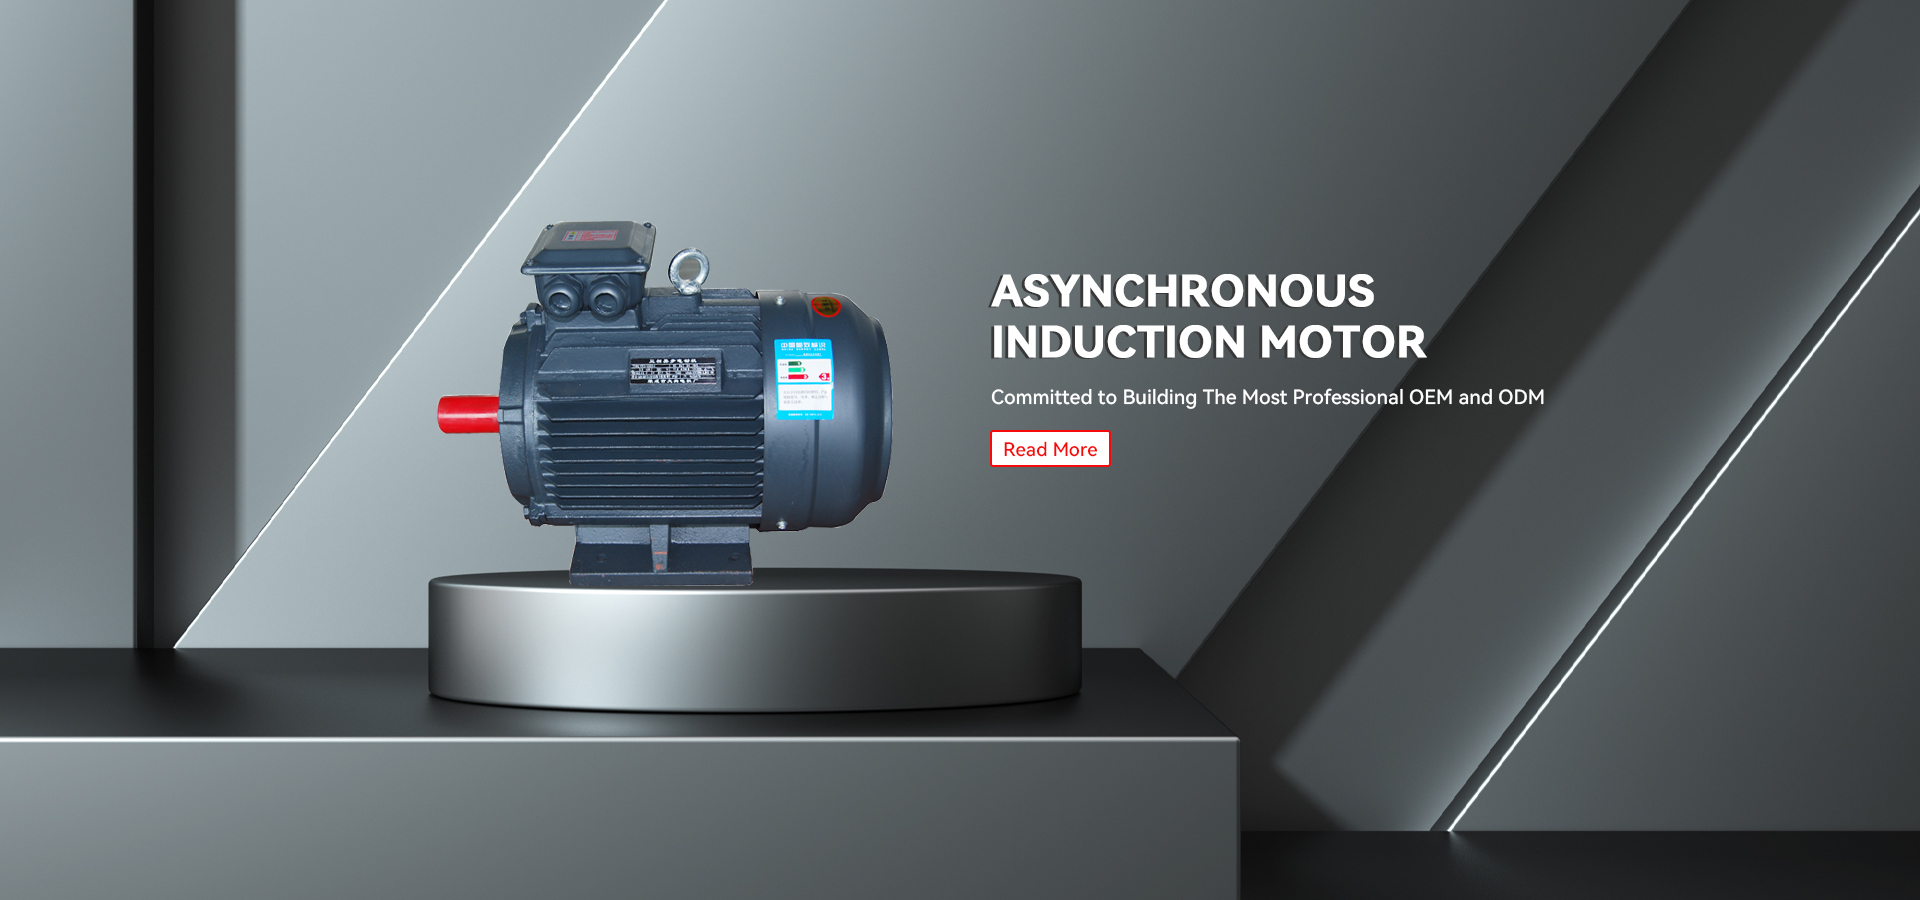 I-Asynchronous Induction Motor Factory